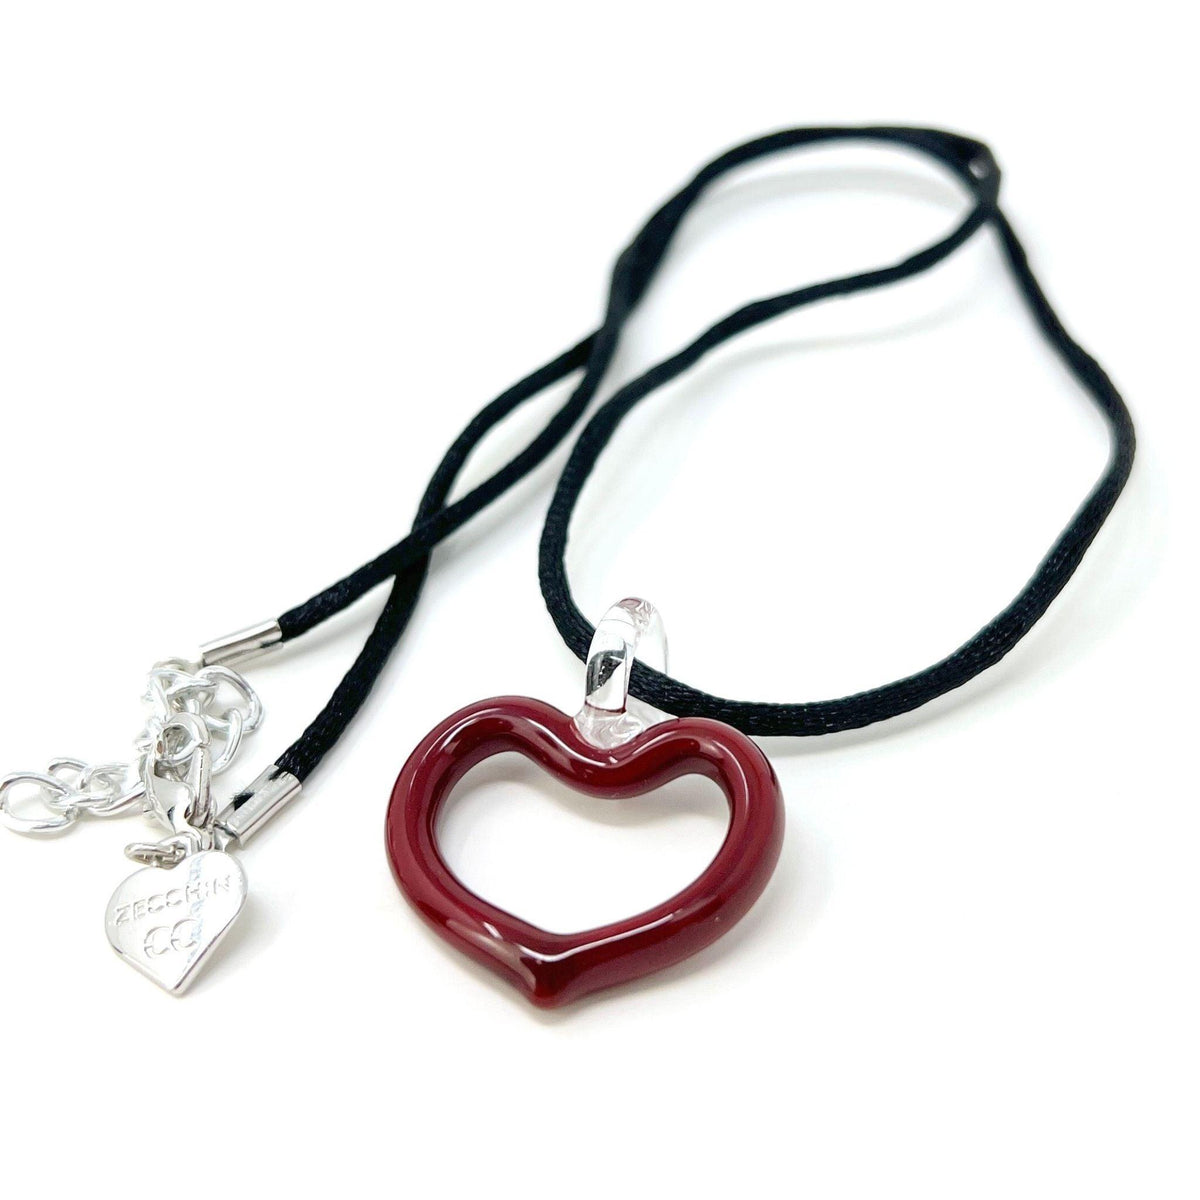 Murano Glass Heart Pendant Necklace, Small, Medium, Large, Made in Italy Active at MyItalianDecor